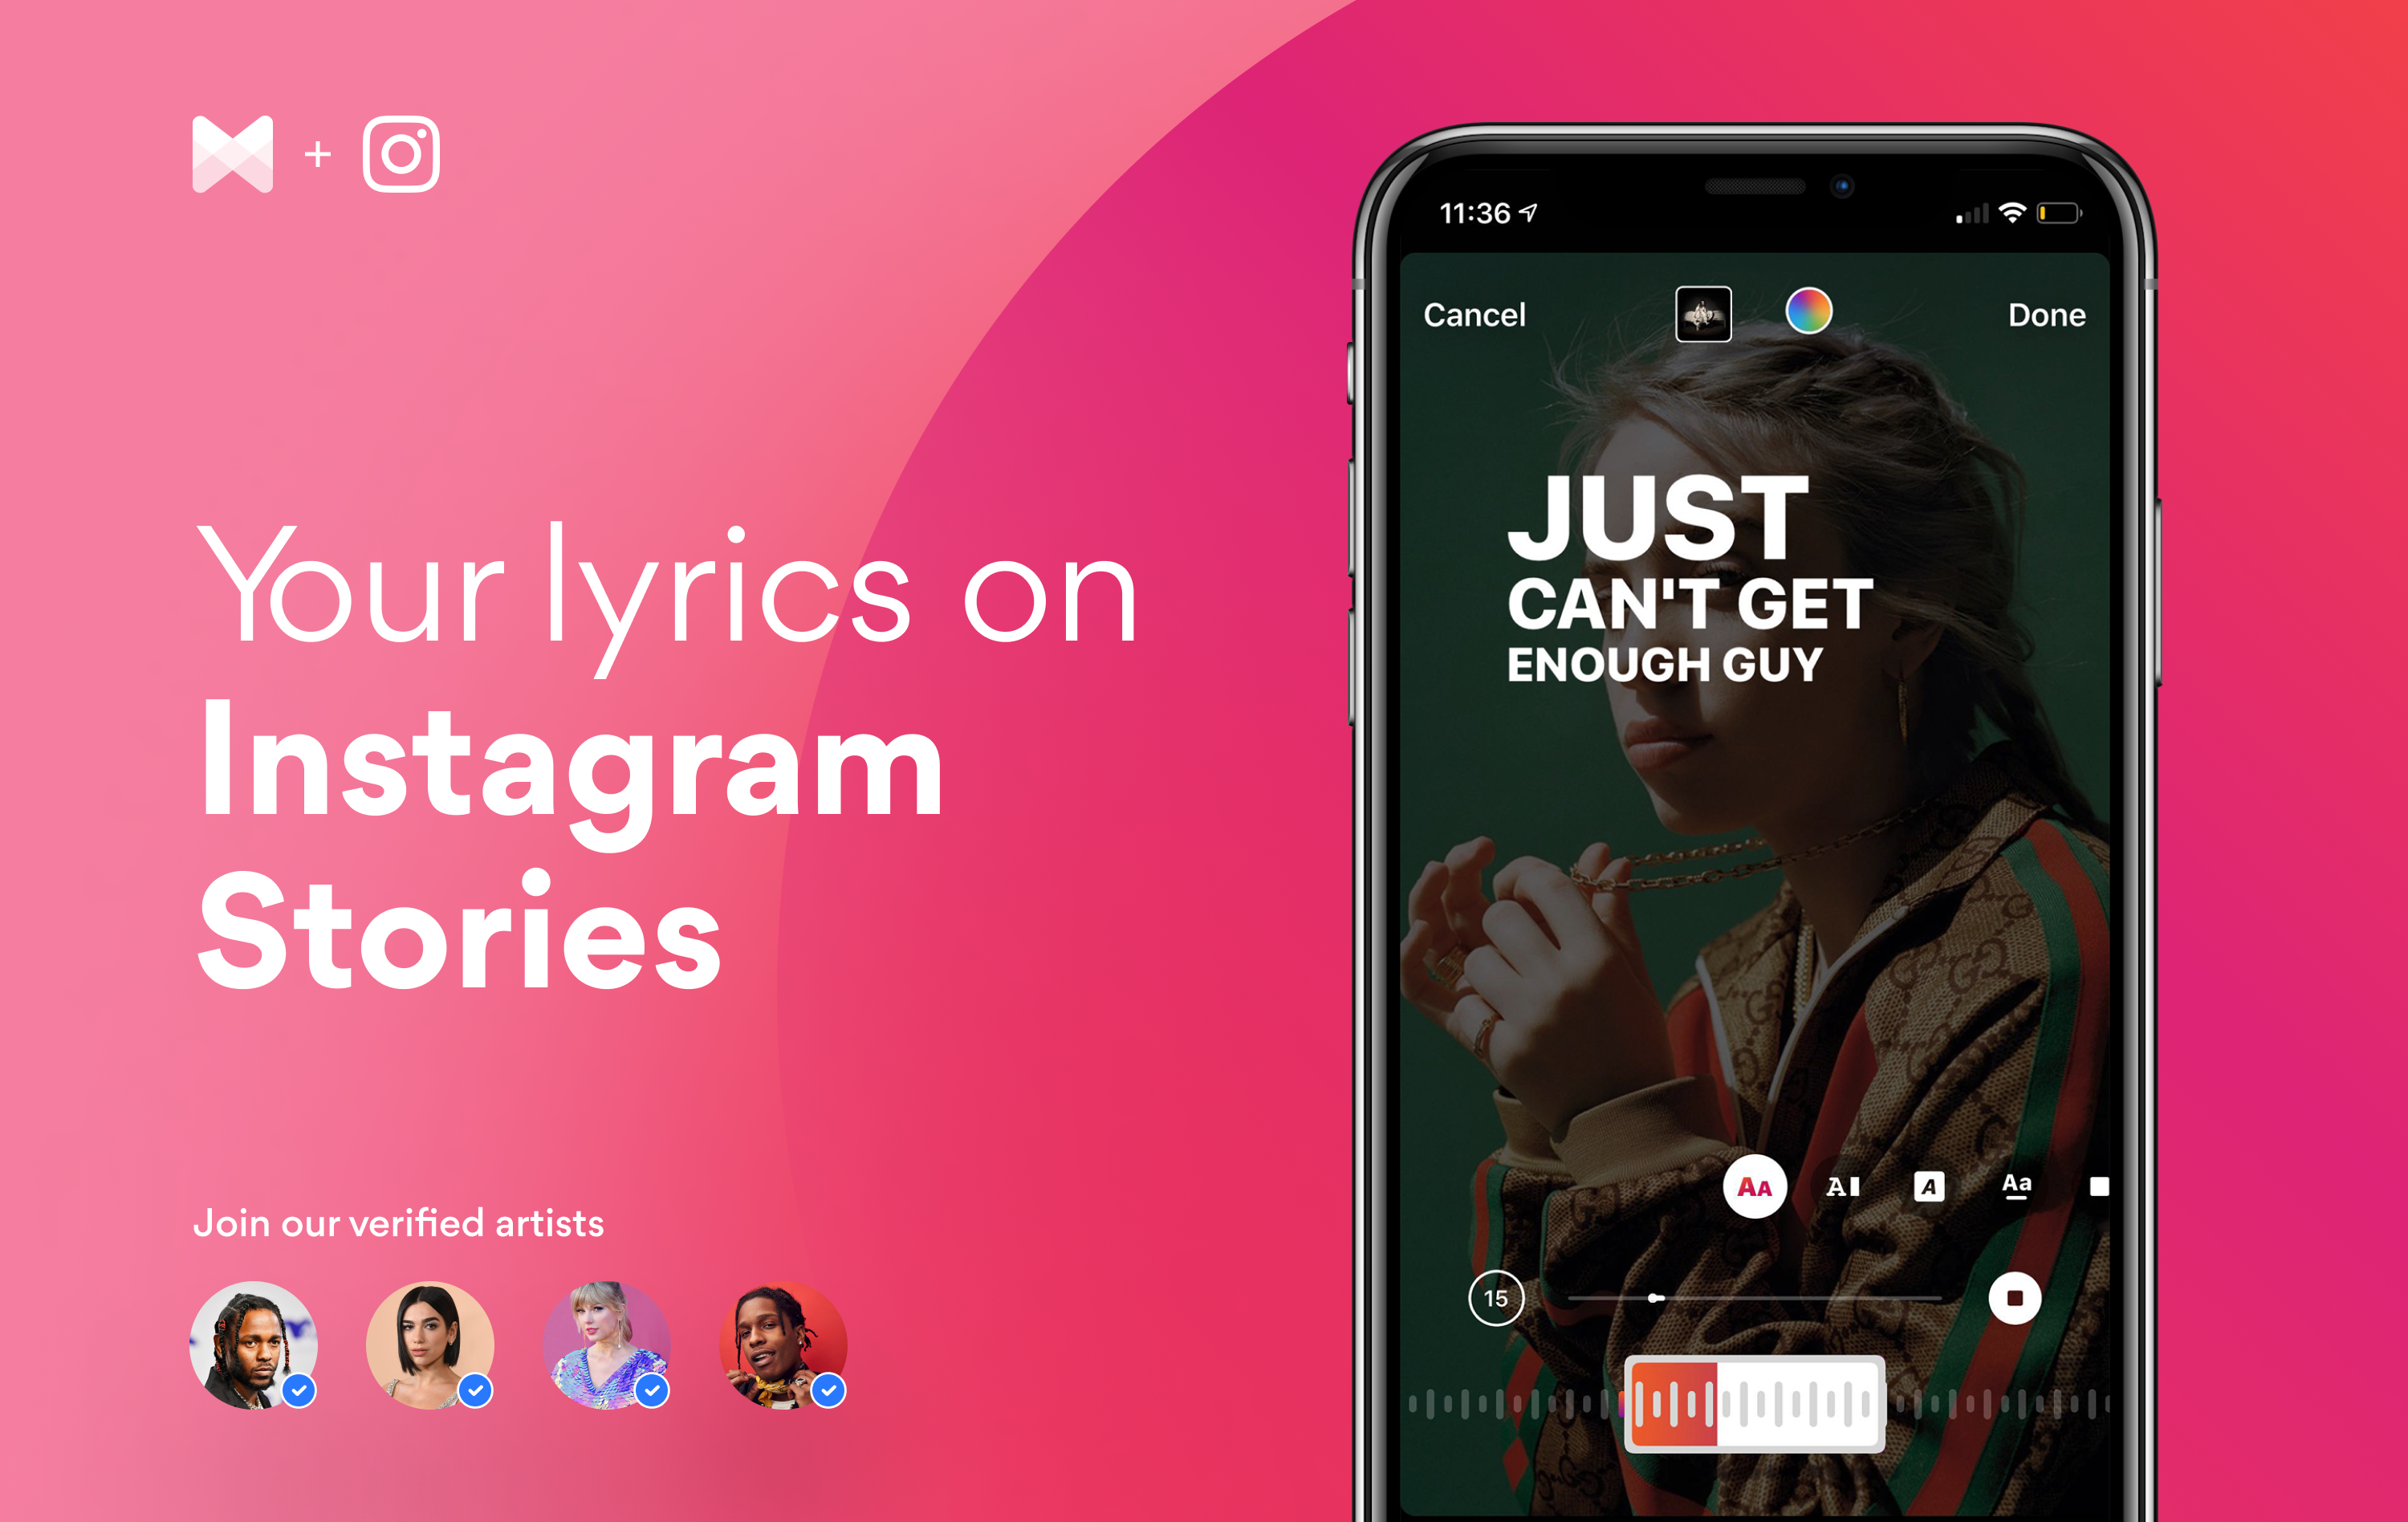 Easy] Add Music to an Instagram Story with/without Stickers